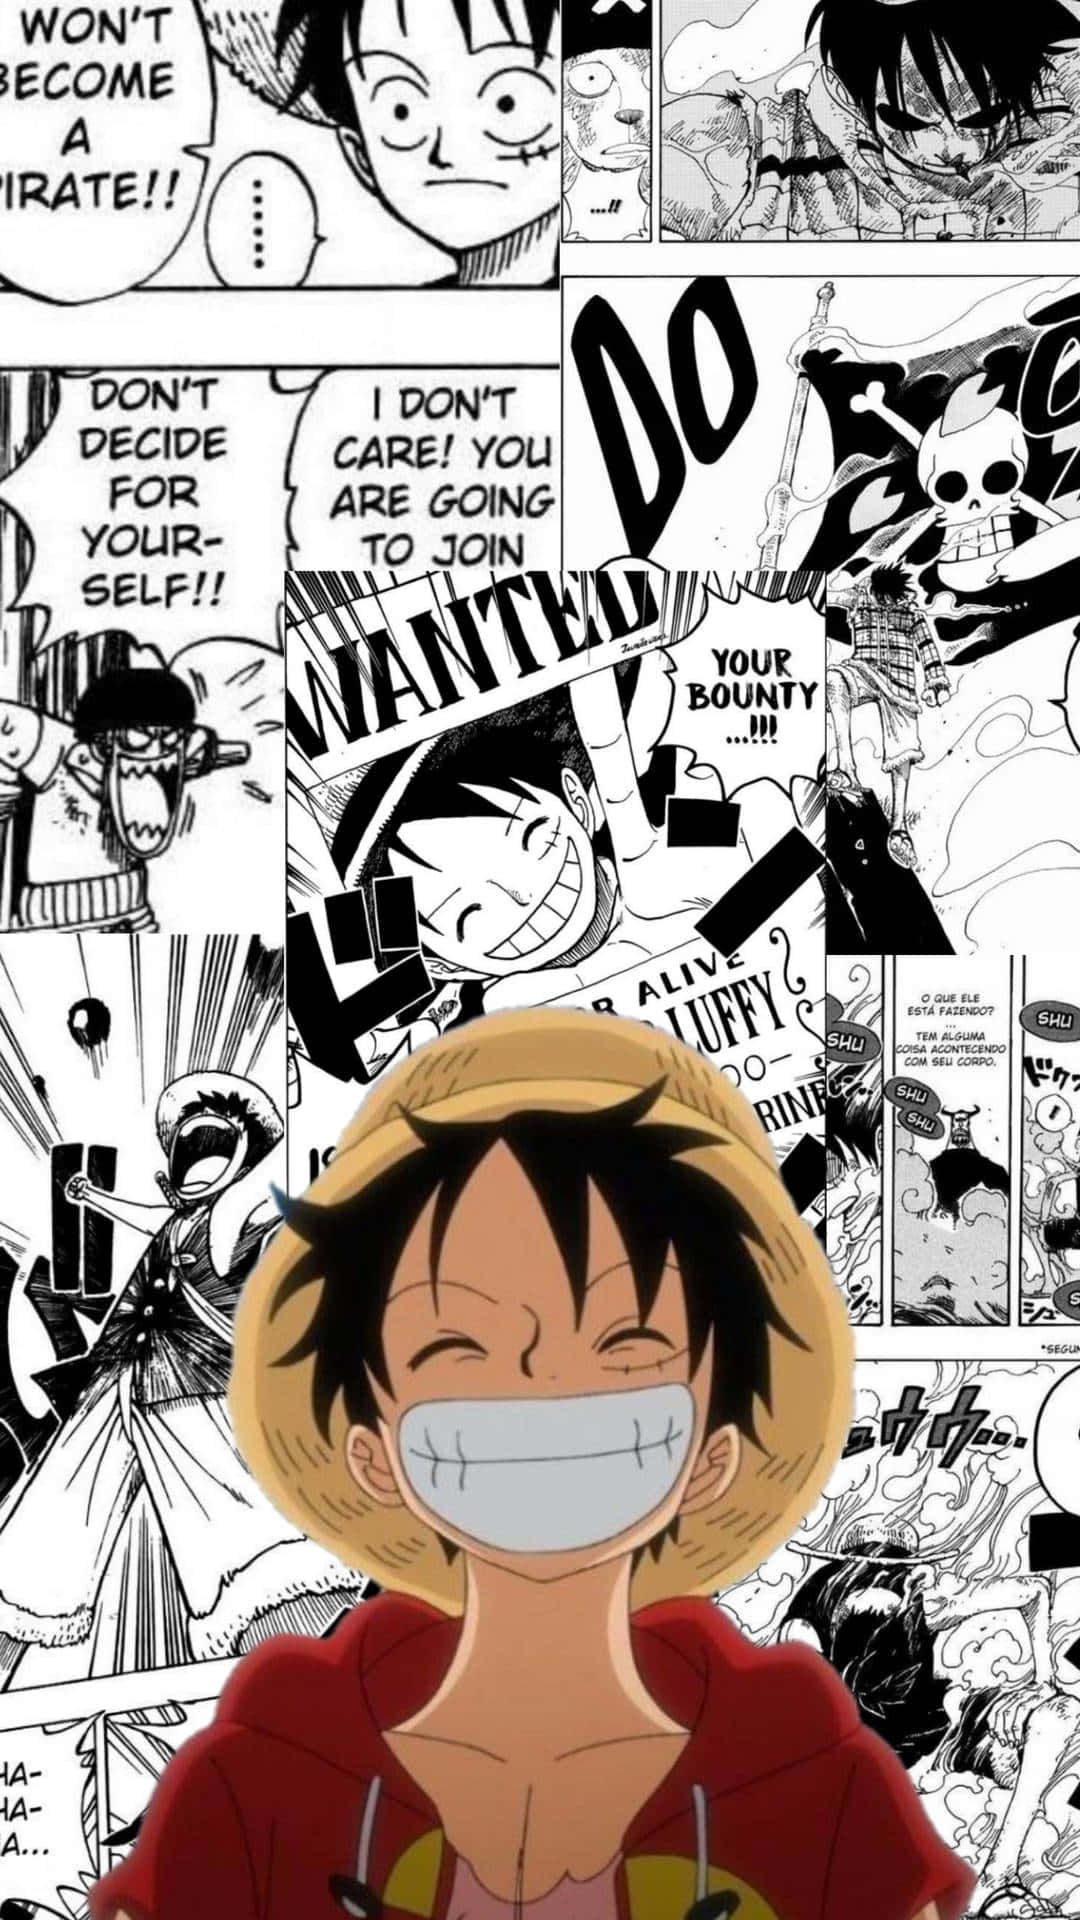 Monkey D. Luffy is a fictional character in the One Piece manga series. - One Piece